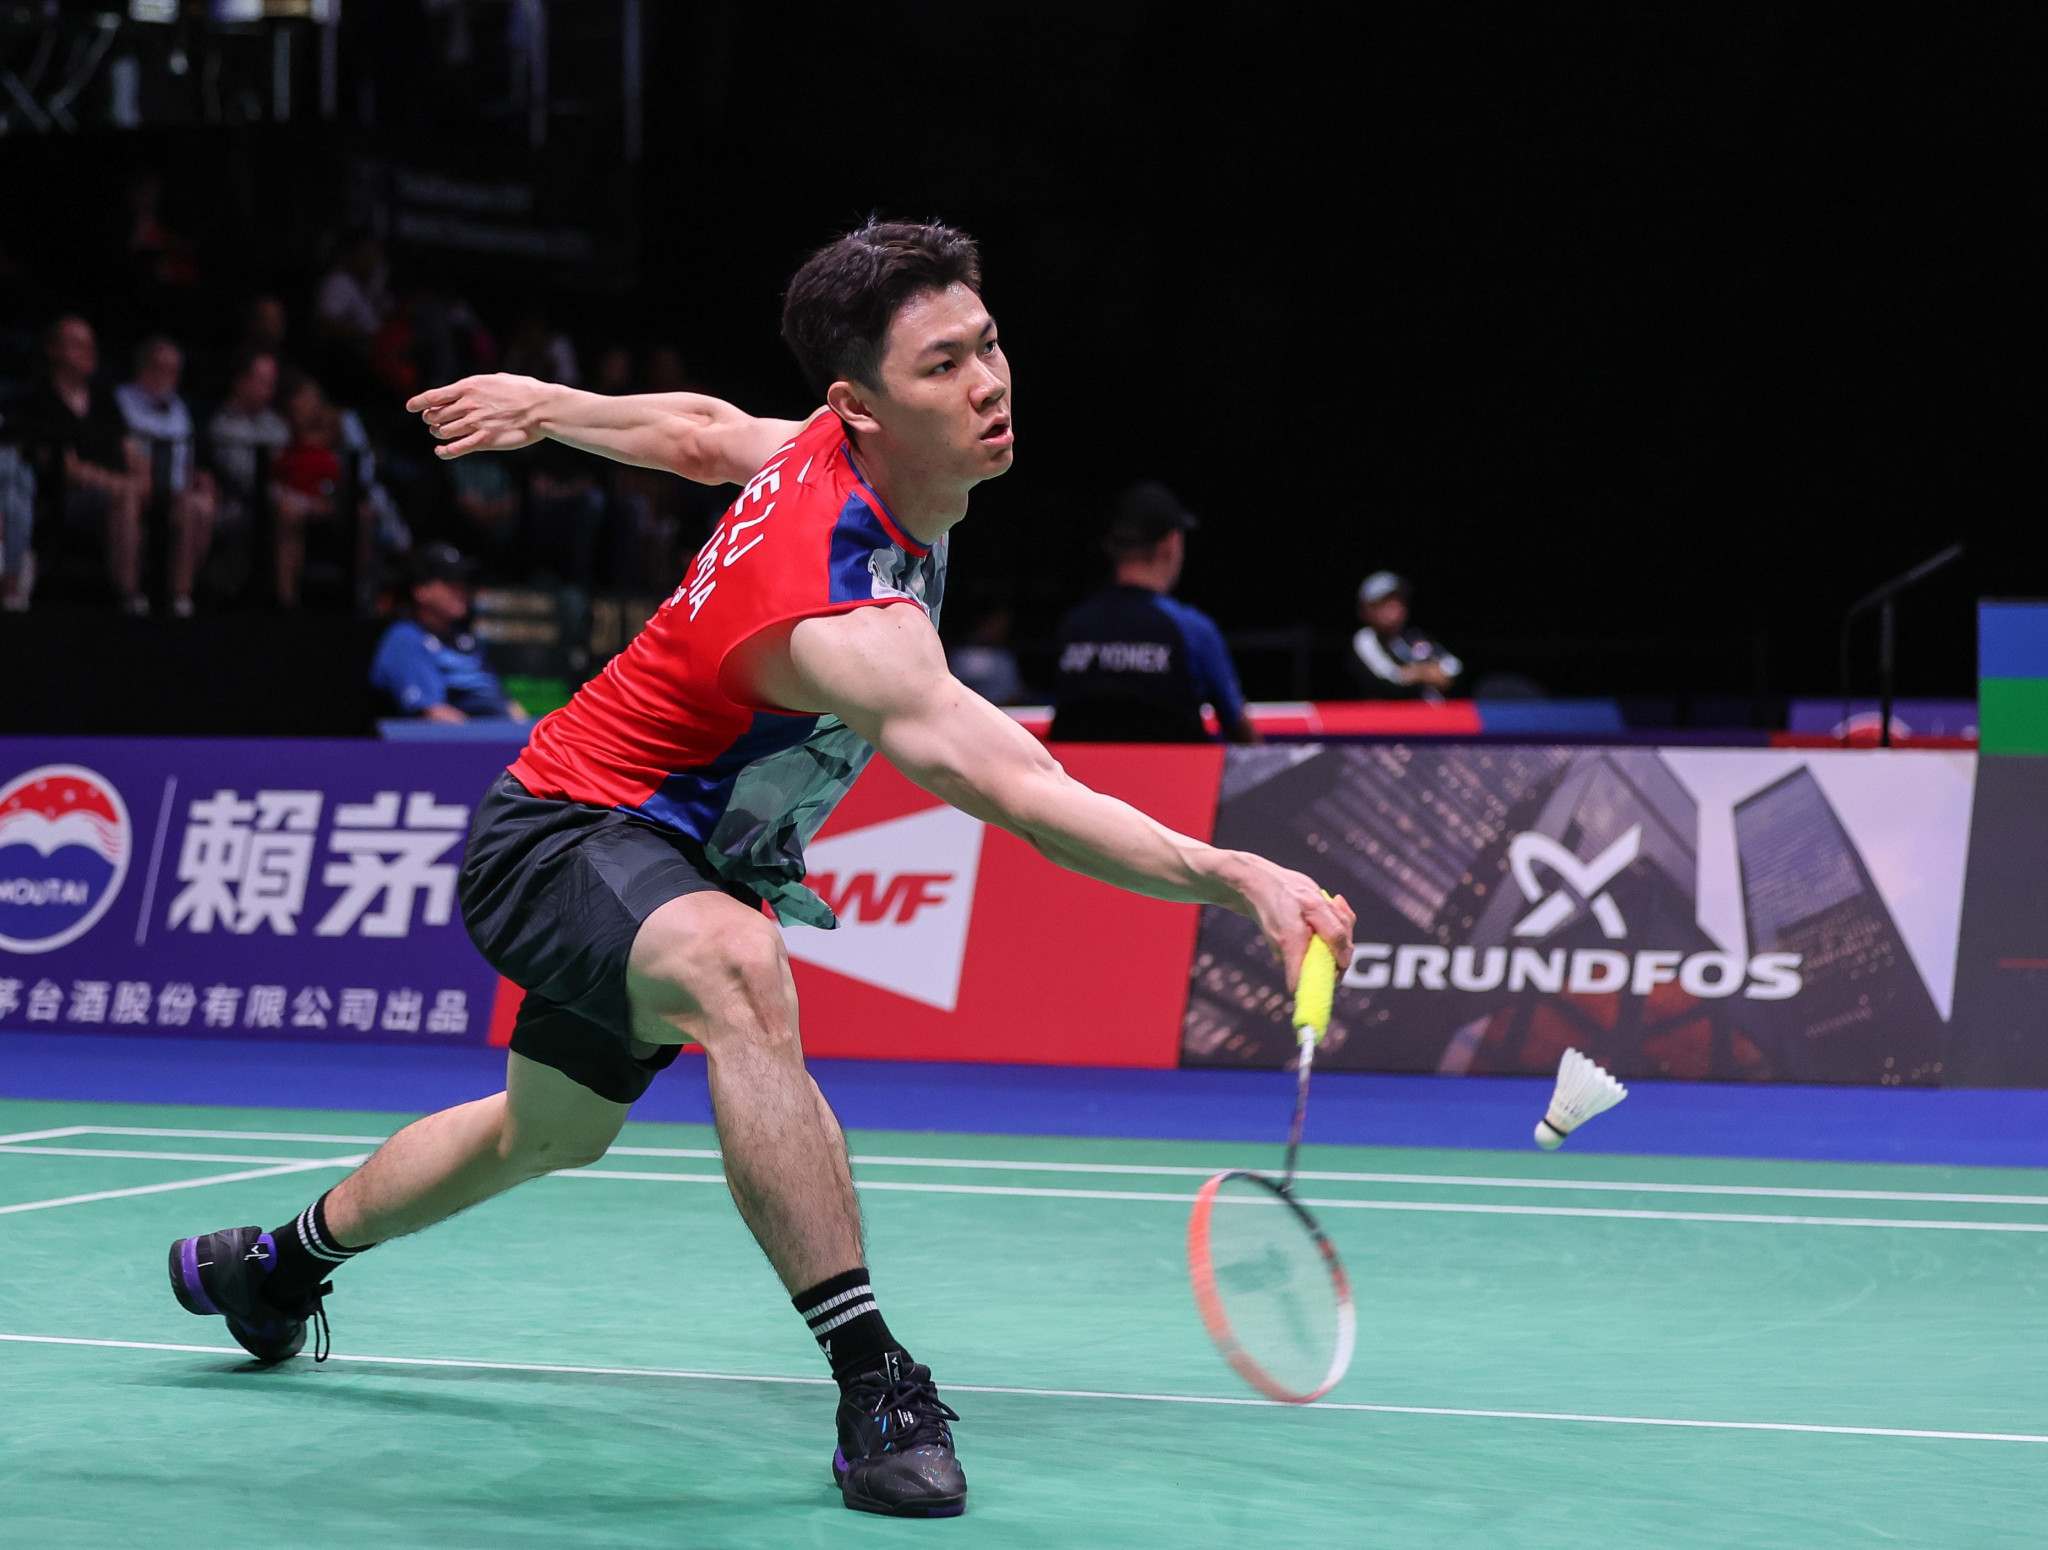 Lee Zii Jia of Malaysia proved too strong for Canada's Brian Yang as he advanced to the third round ©Badmintonphoto